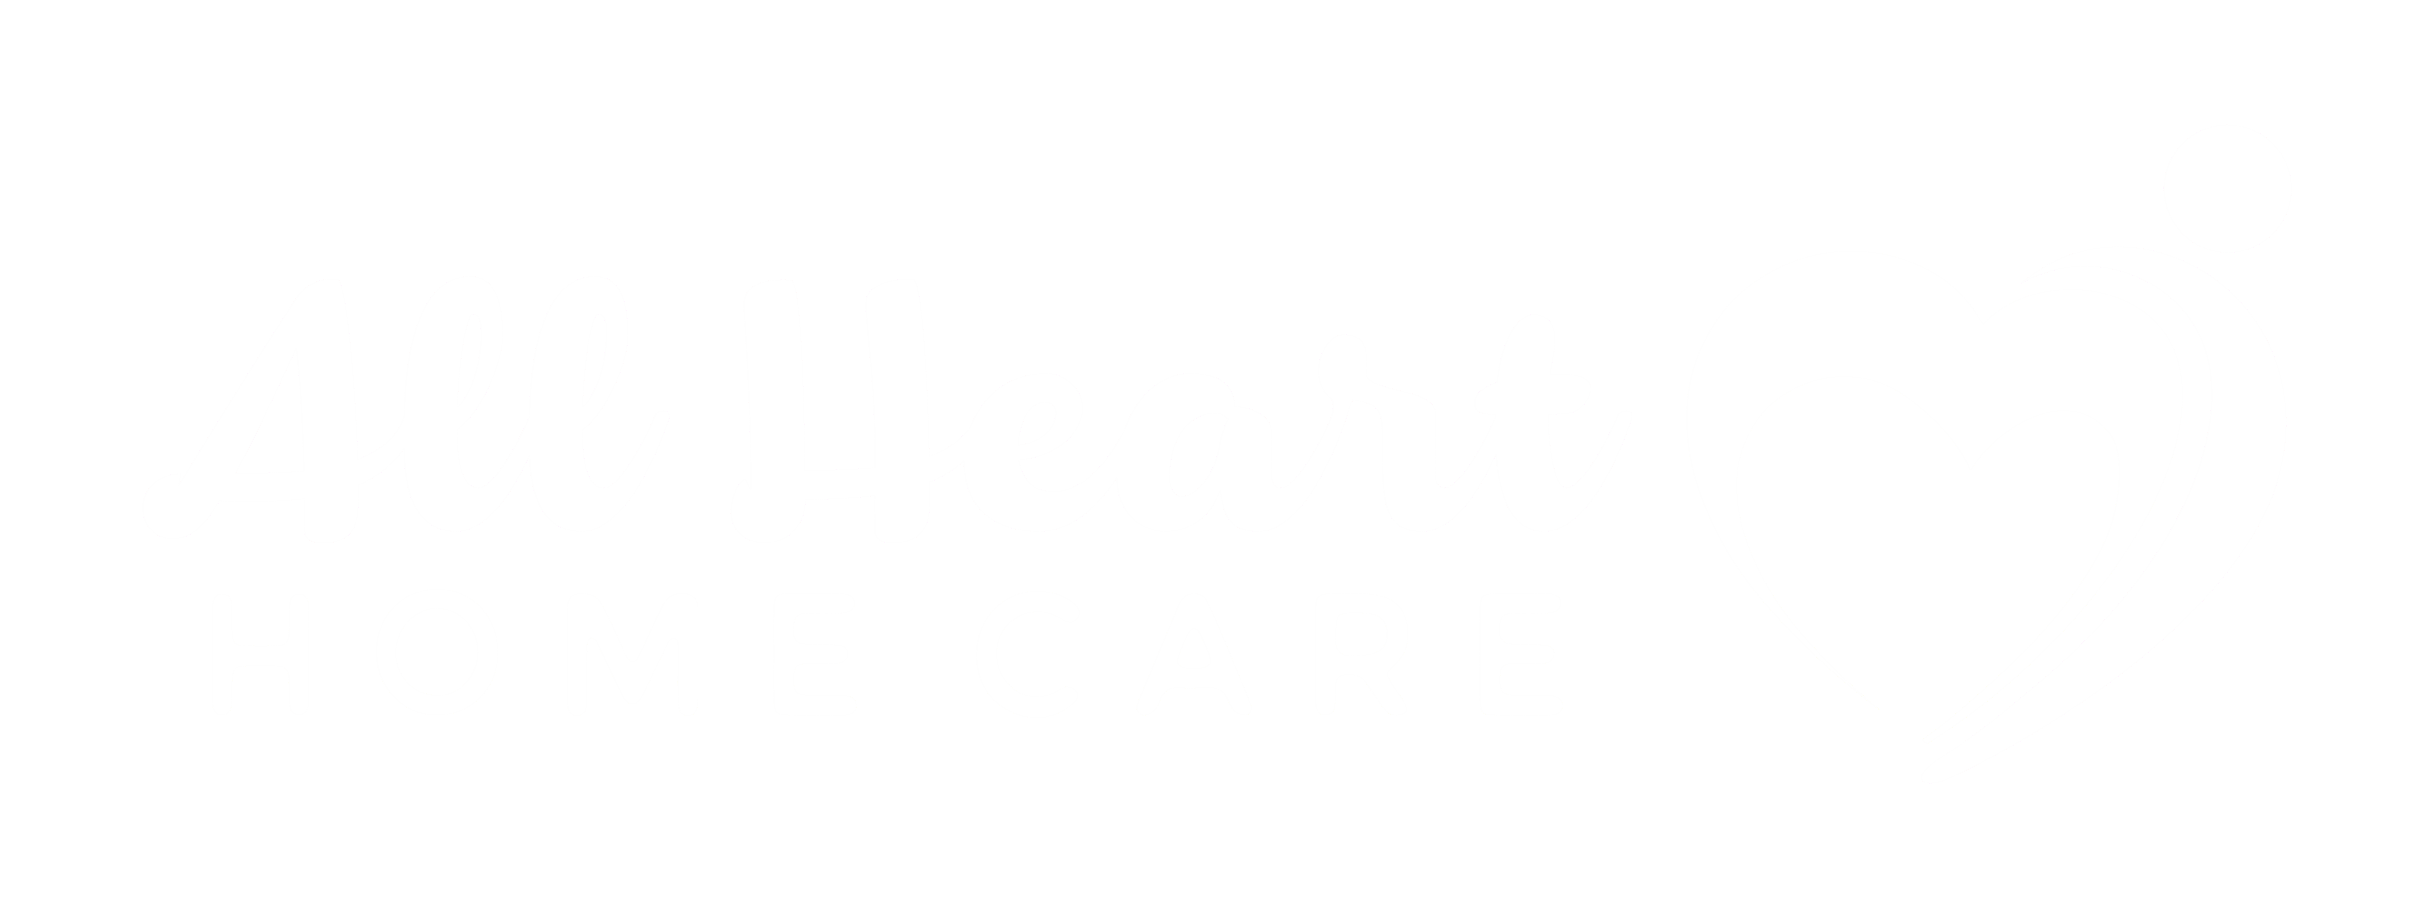 All Heart Home Care White Logo Header and Footer